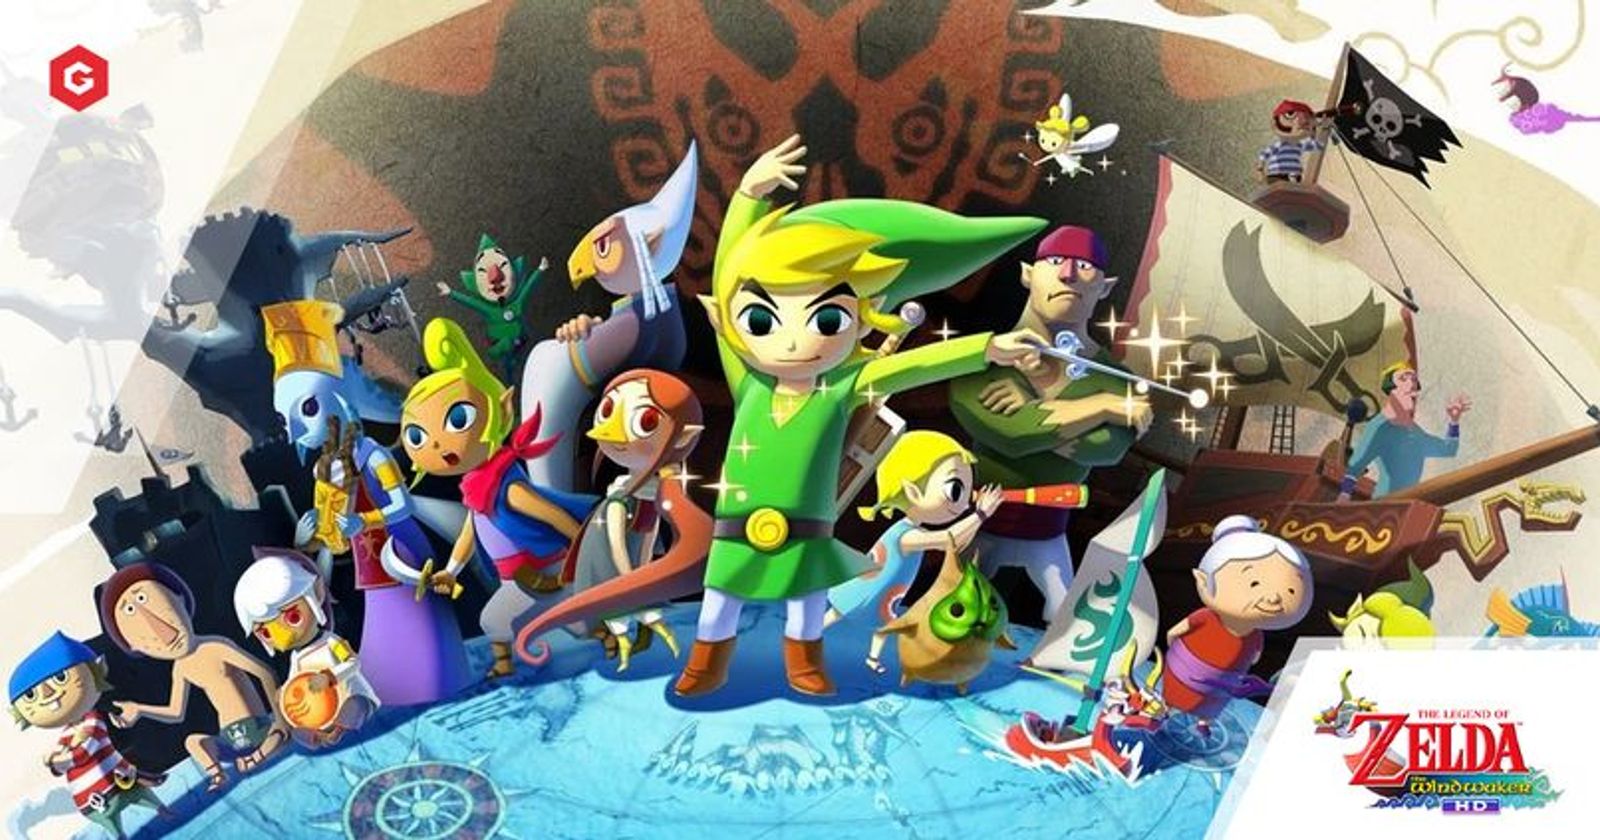 The Legend Of Zelda: Wind Waker HD Coming To Wii U This Fall - Game Informer